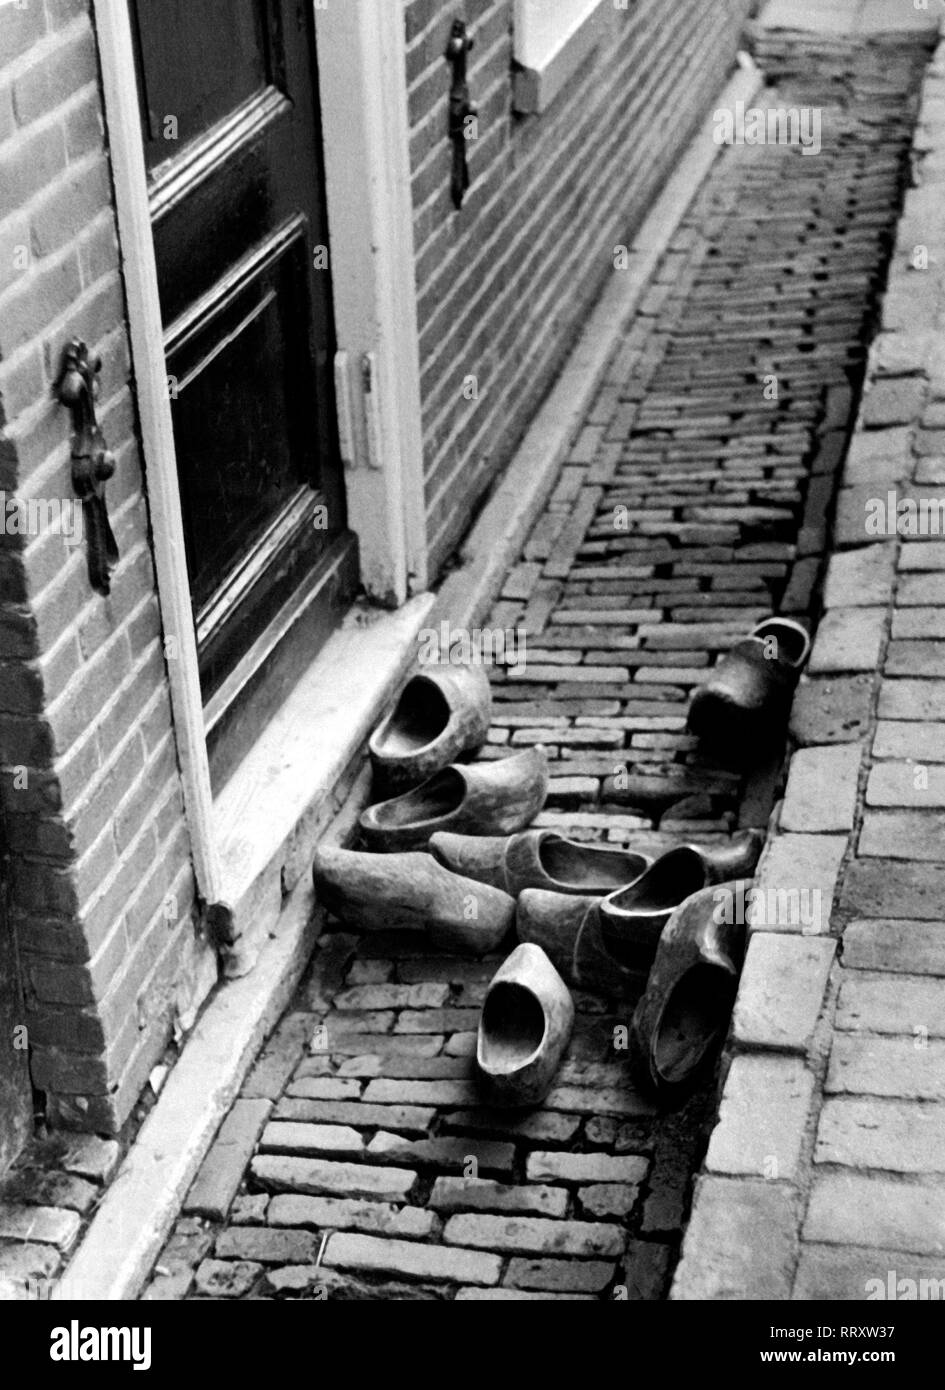 Travel to Holland - Holland, part of the Netherlands - typical Dutch clogs in Volendam. Image date circa 1954. Photo Erich Andres Stock Photo